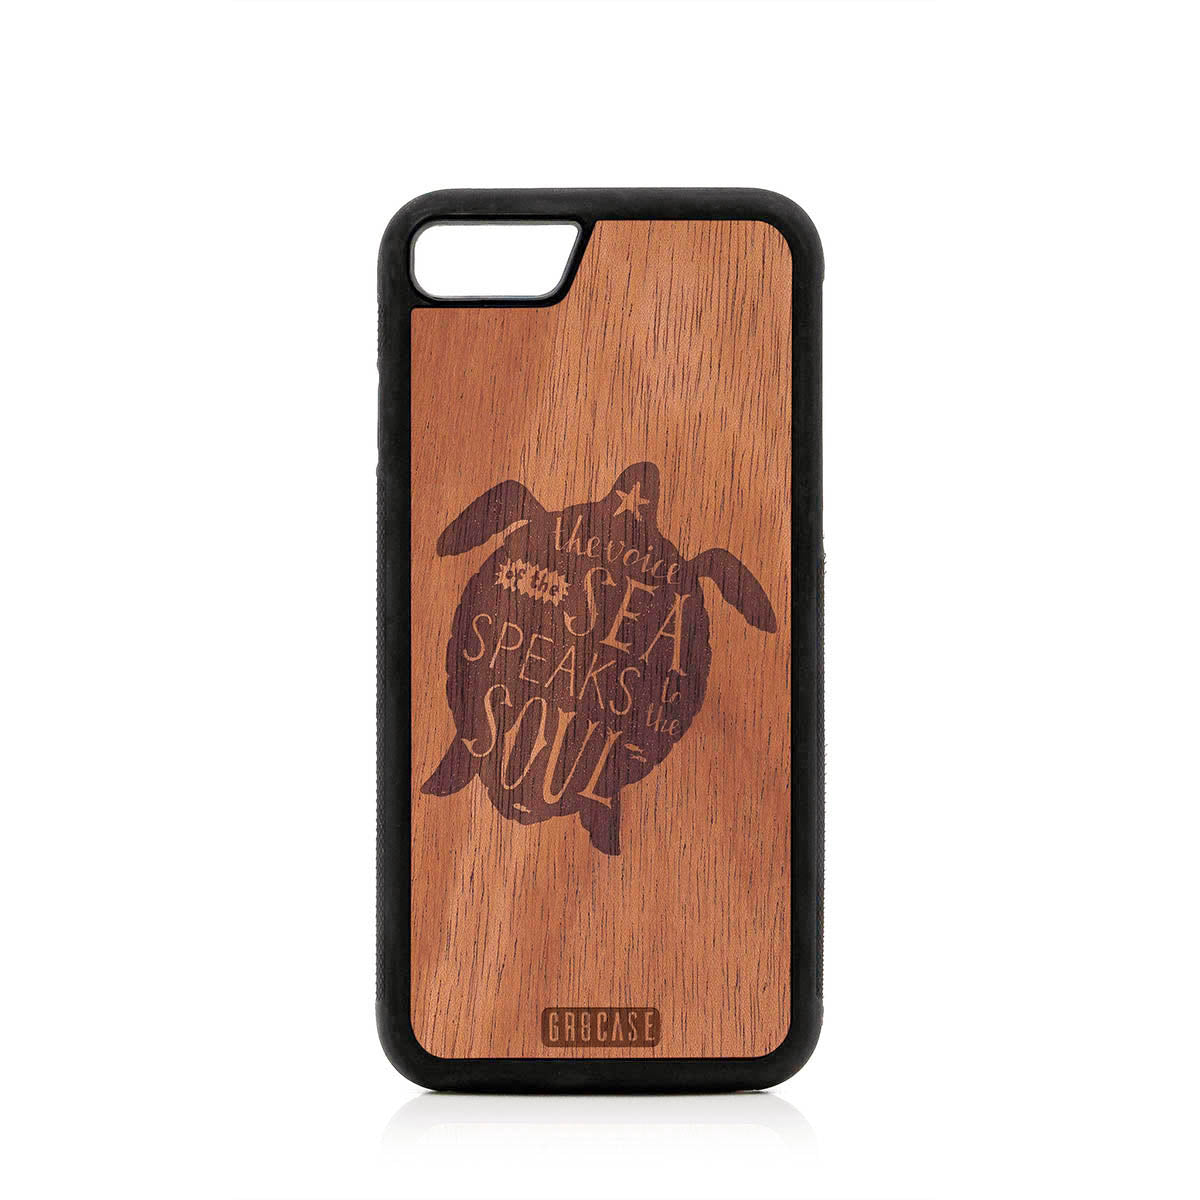 The Voice Of The Sea Speaks To The Soul (Turtle) Design Wood Case For iPhone 7/8